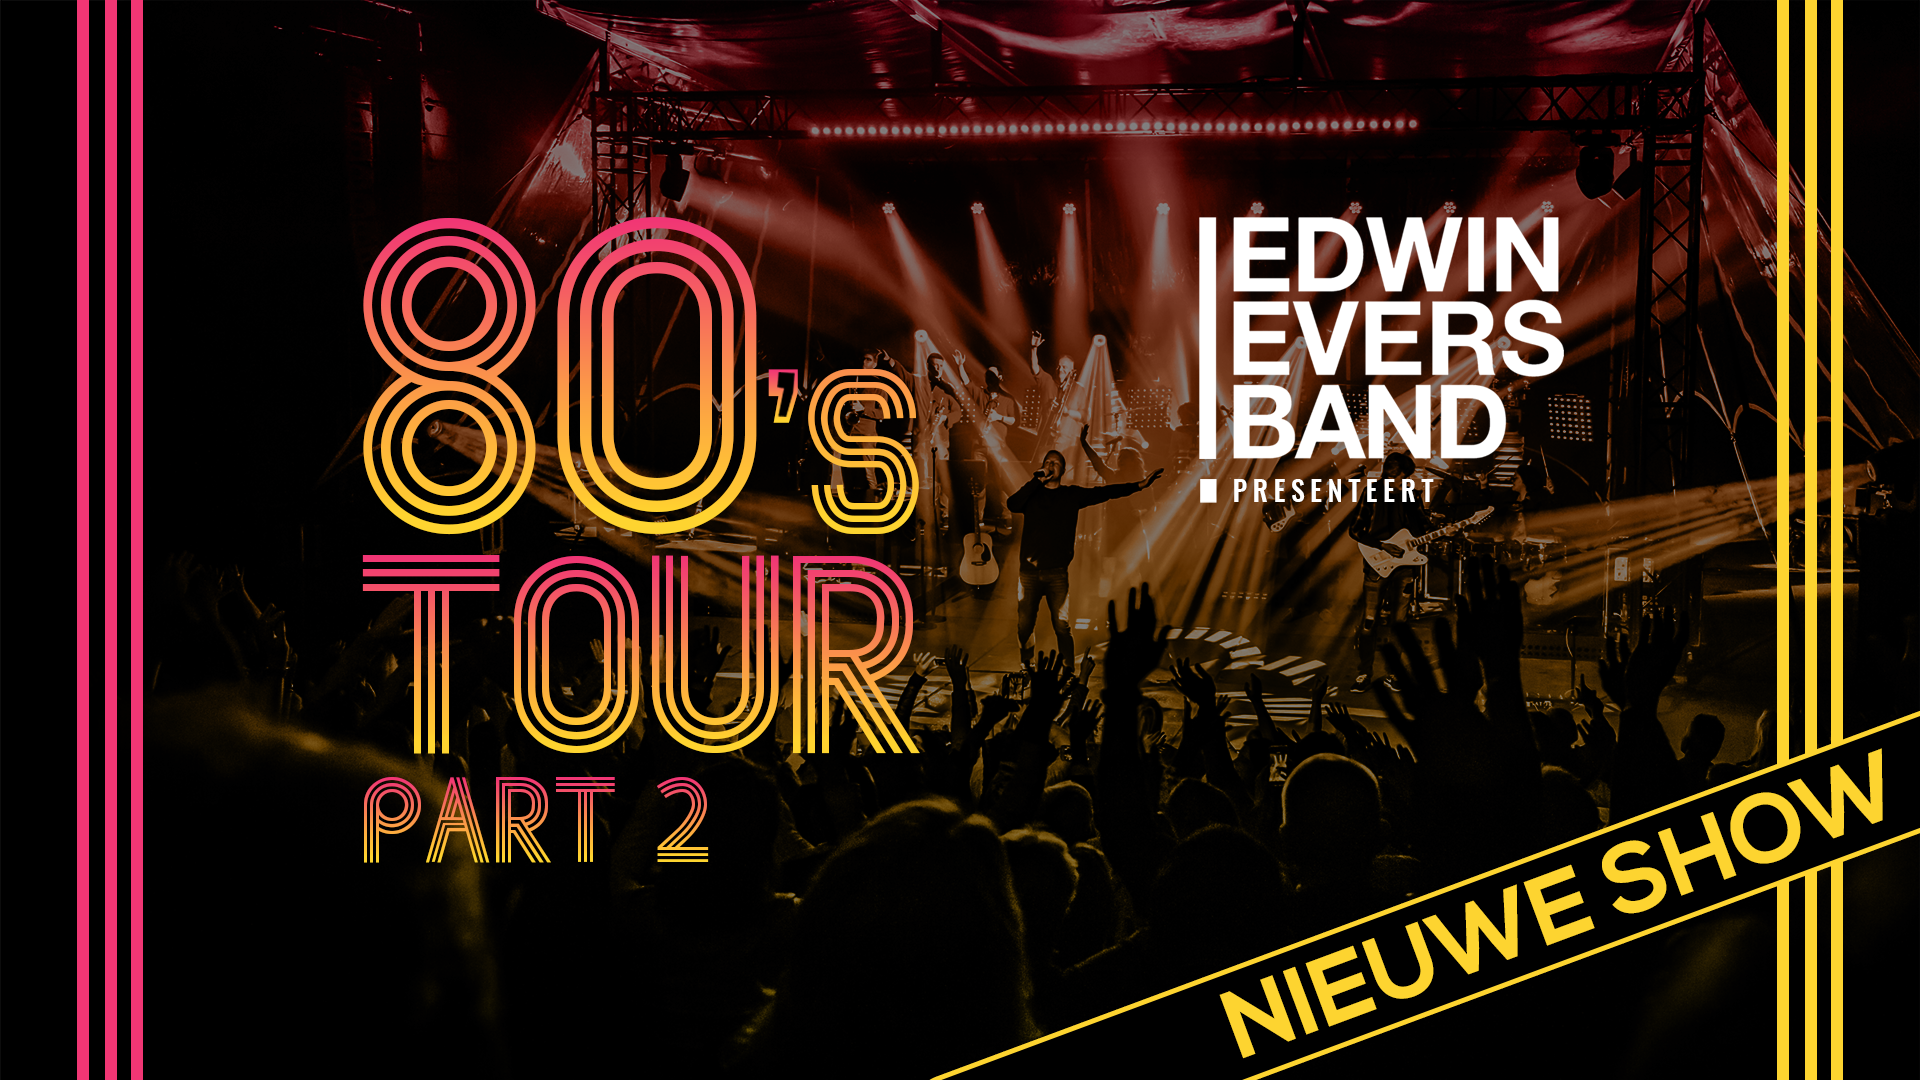 Live at Amsterdamse Bos / Edwin Evers Band presenteert: 80’S Tour Part 2